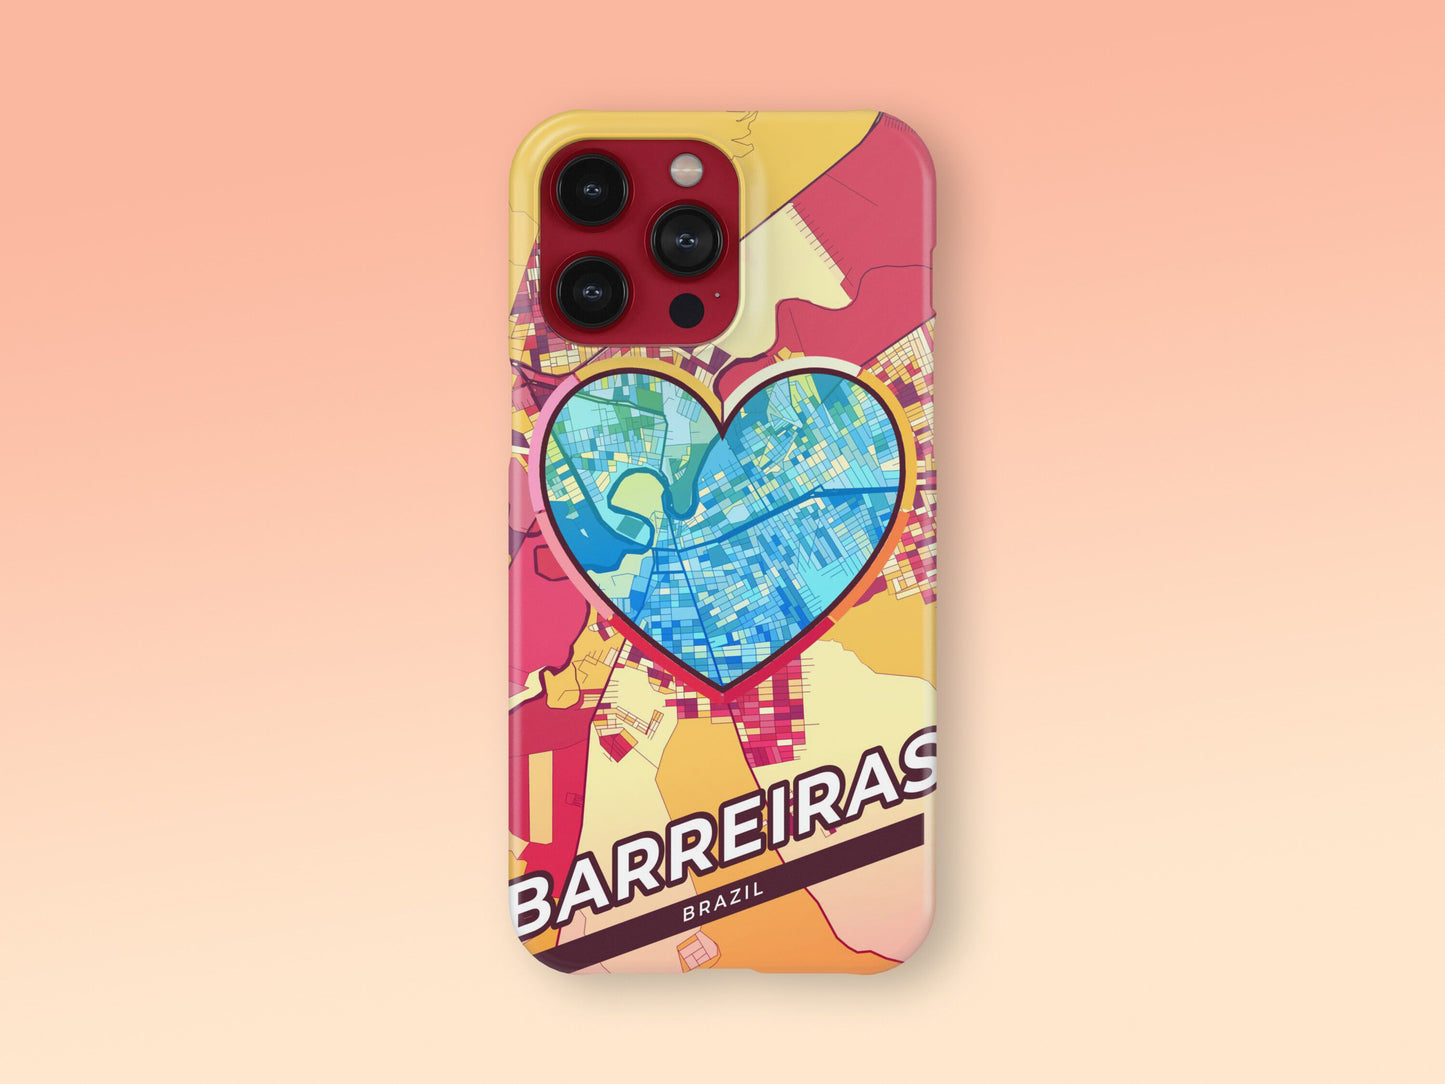 Barreiras Brazil slim phone case with colorful icon. Birthday, wedding or housewarming gift. Couple match cases. 2